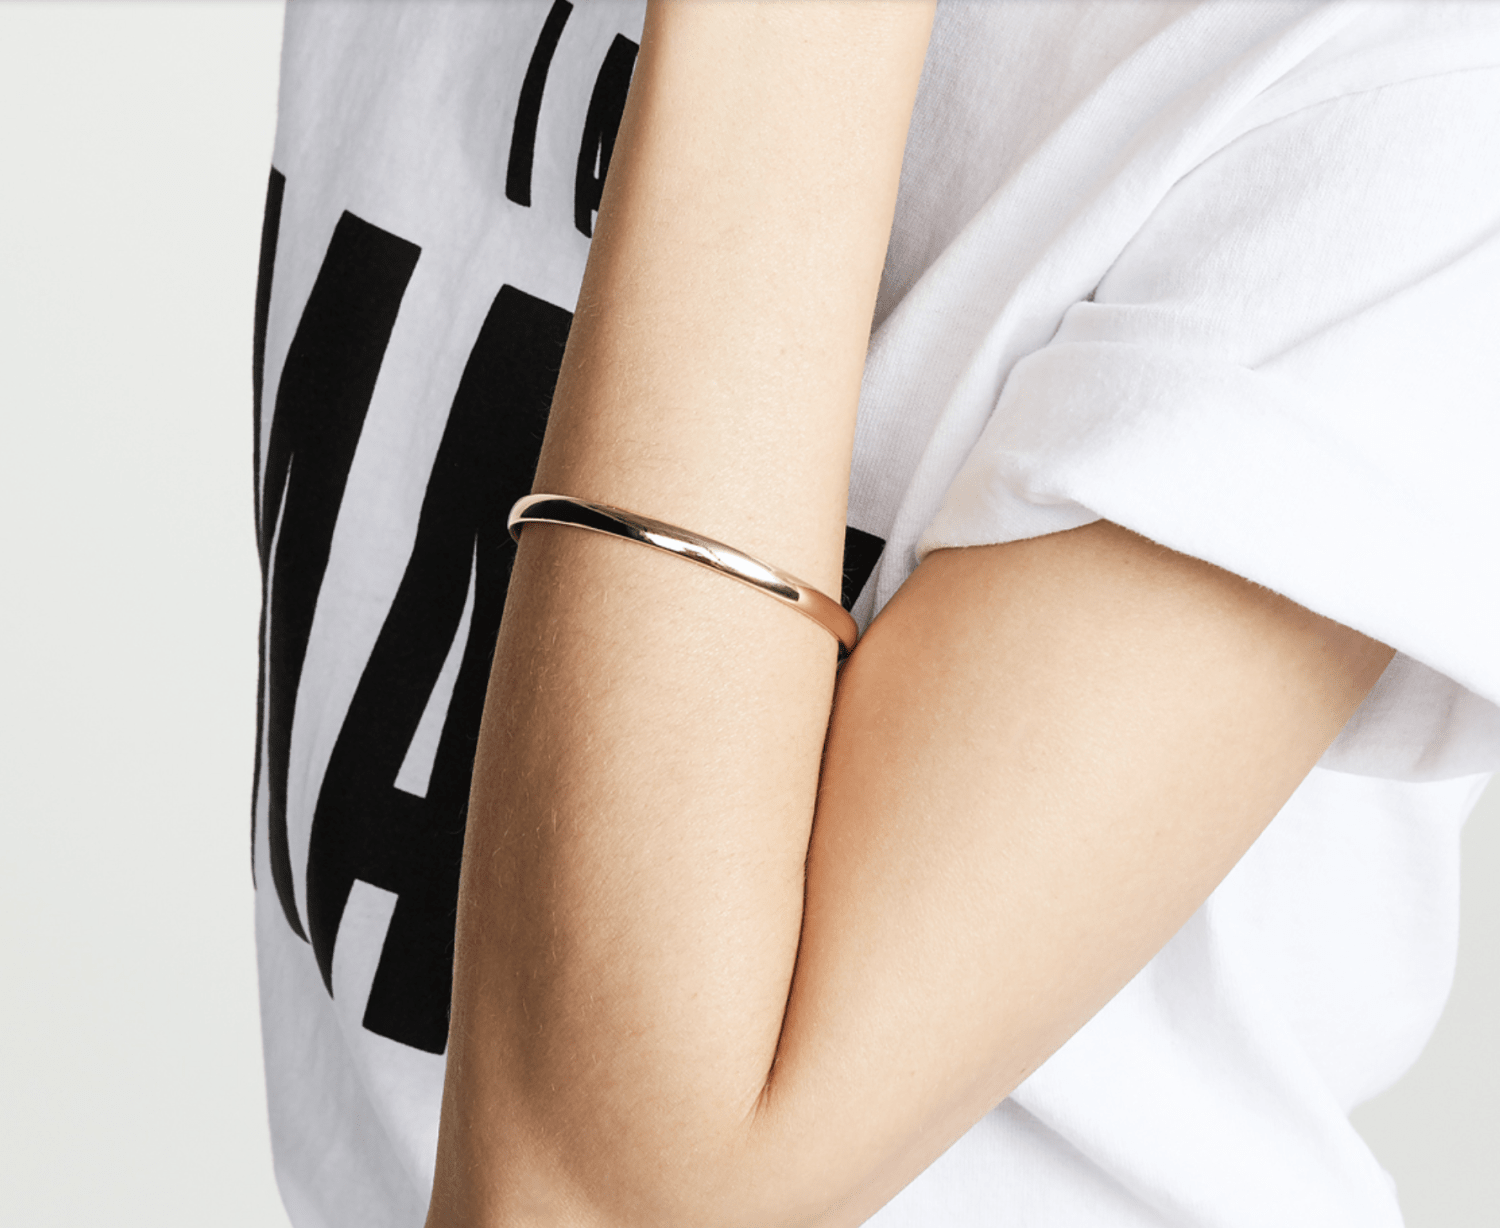 The Kate Spade heart of gold bangle is 